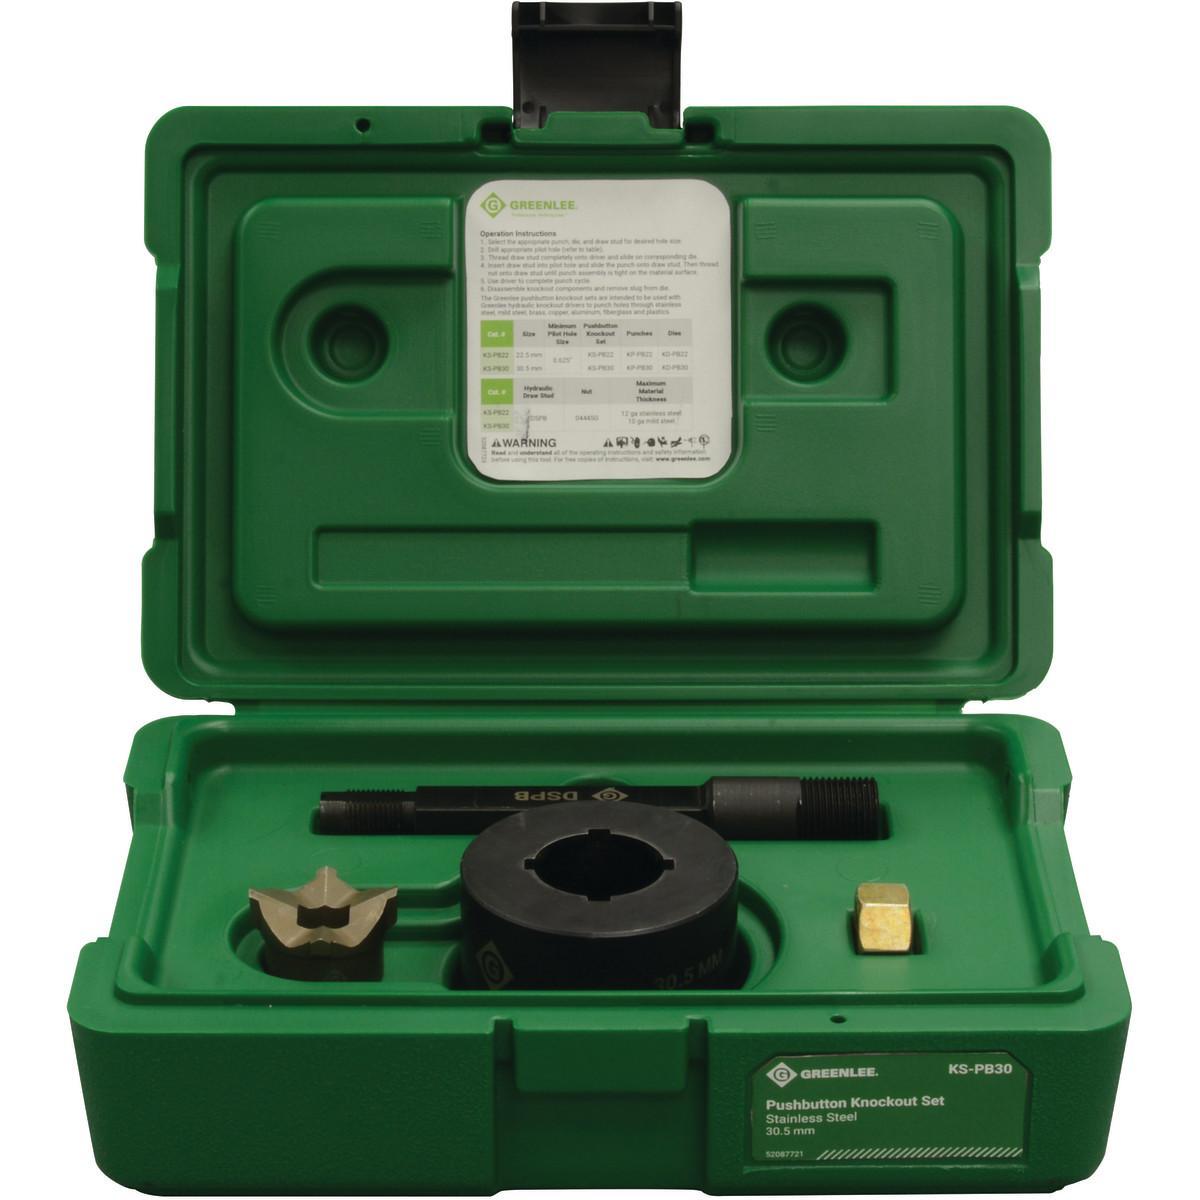 Greenlee® Slug-Splitter SC® 7307SP Speed Knockout Kit, 10 ga Capacity, 0.885 to 2.416 in Actual Hole, For Use With 746 Hydraulic Ram and 767 Pump Punch Driver, Carbon Alloy Steel